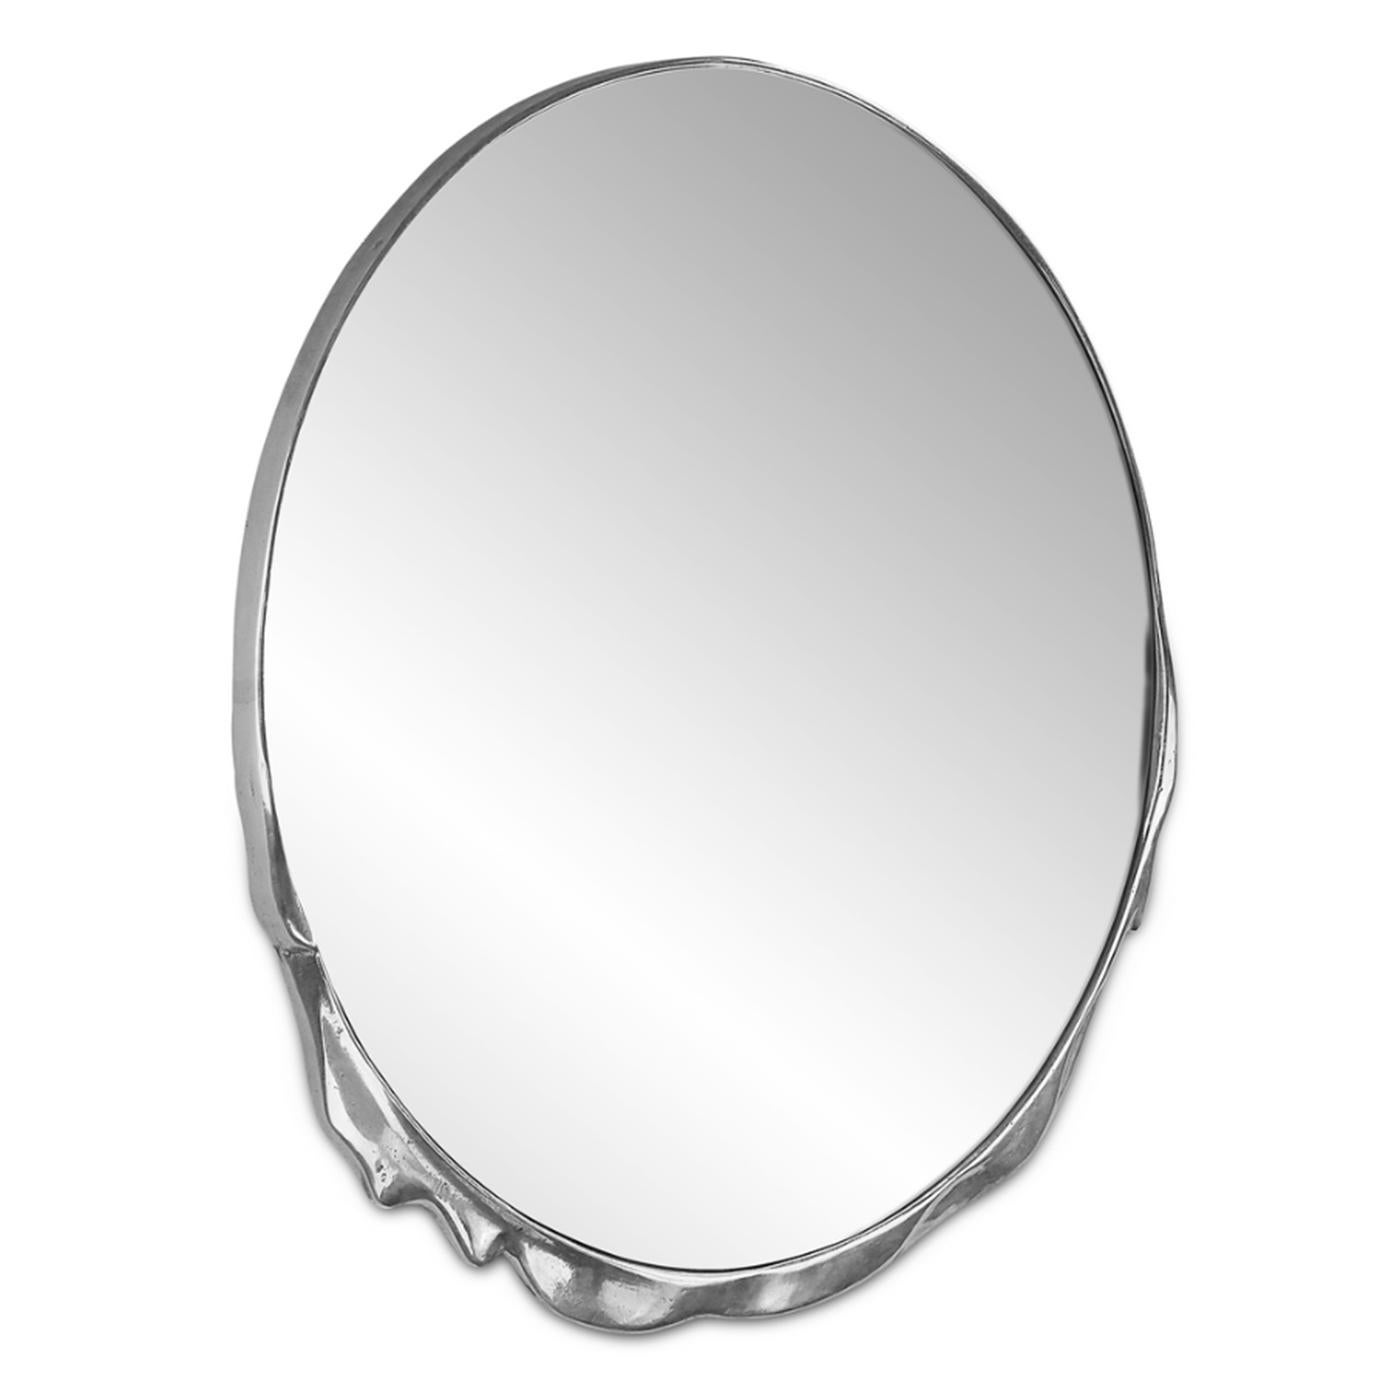 Mirror melted with casted aluminum frame 
in raw and polished finish, with clear mirror glass.